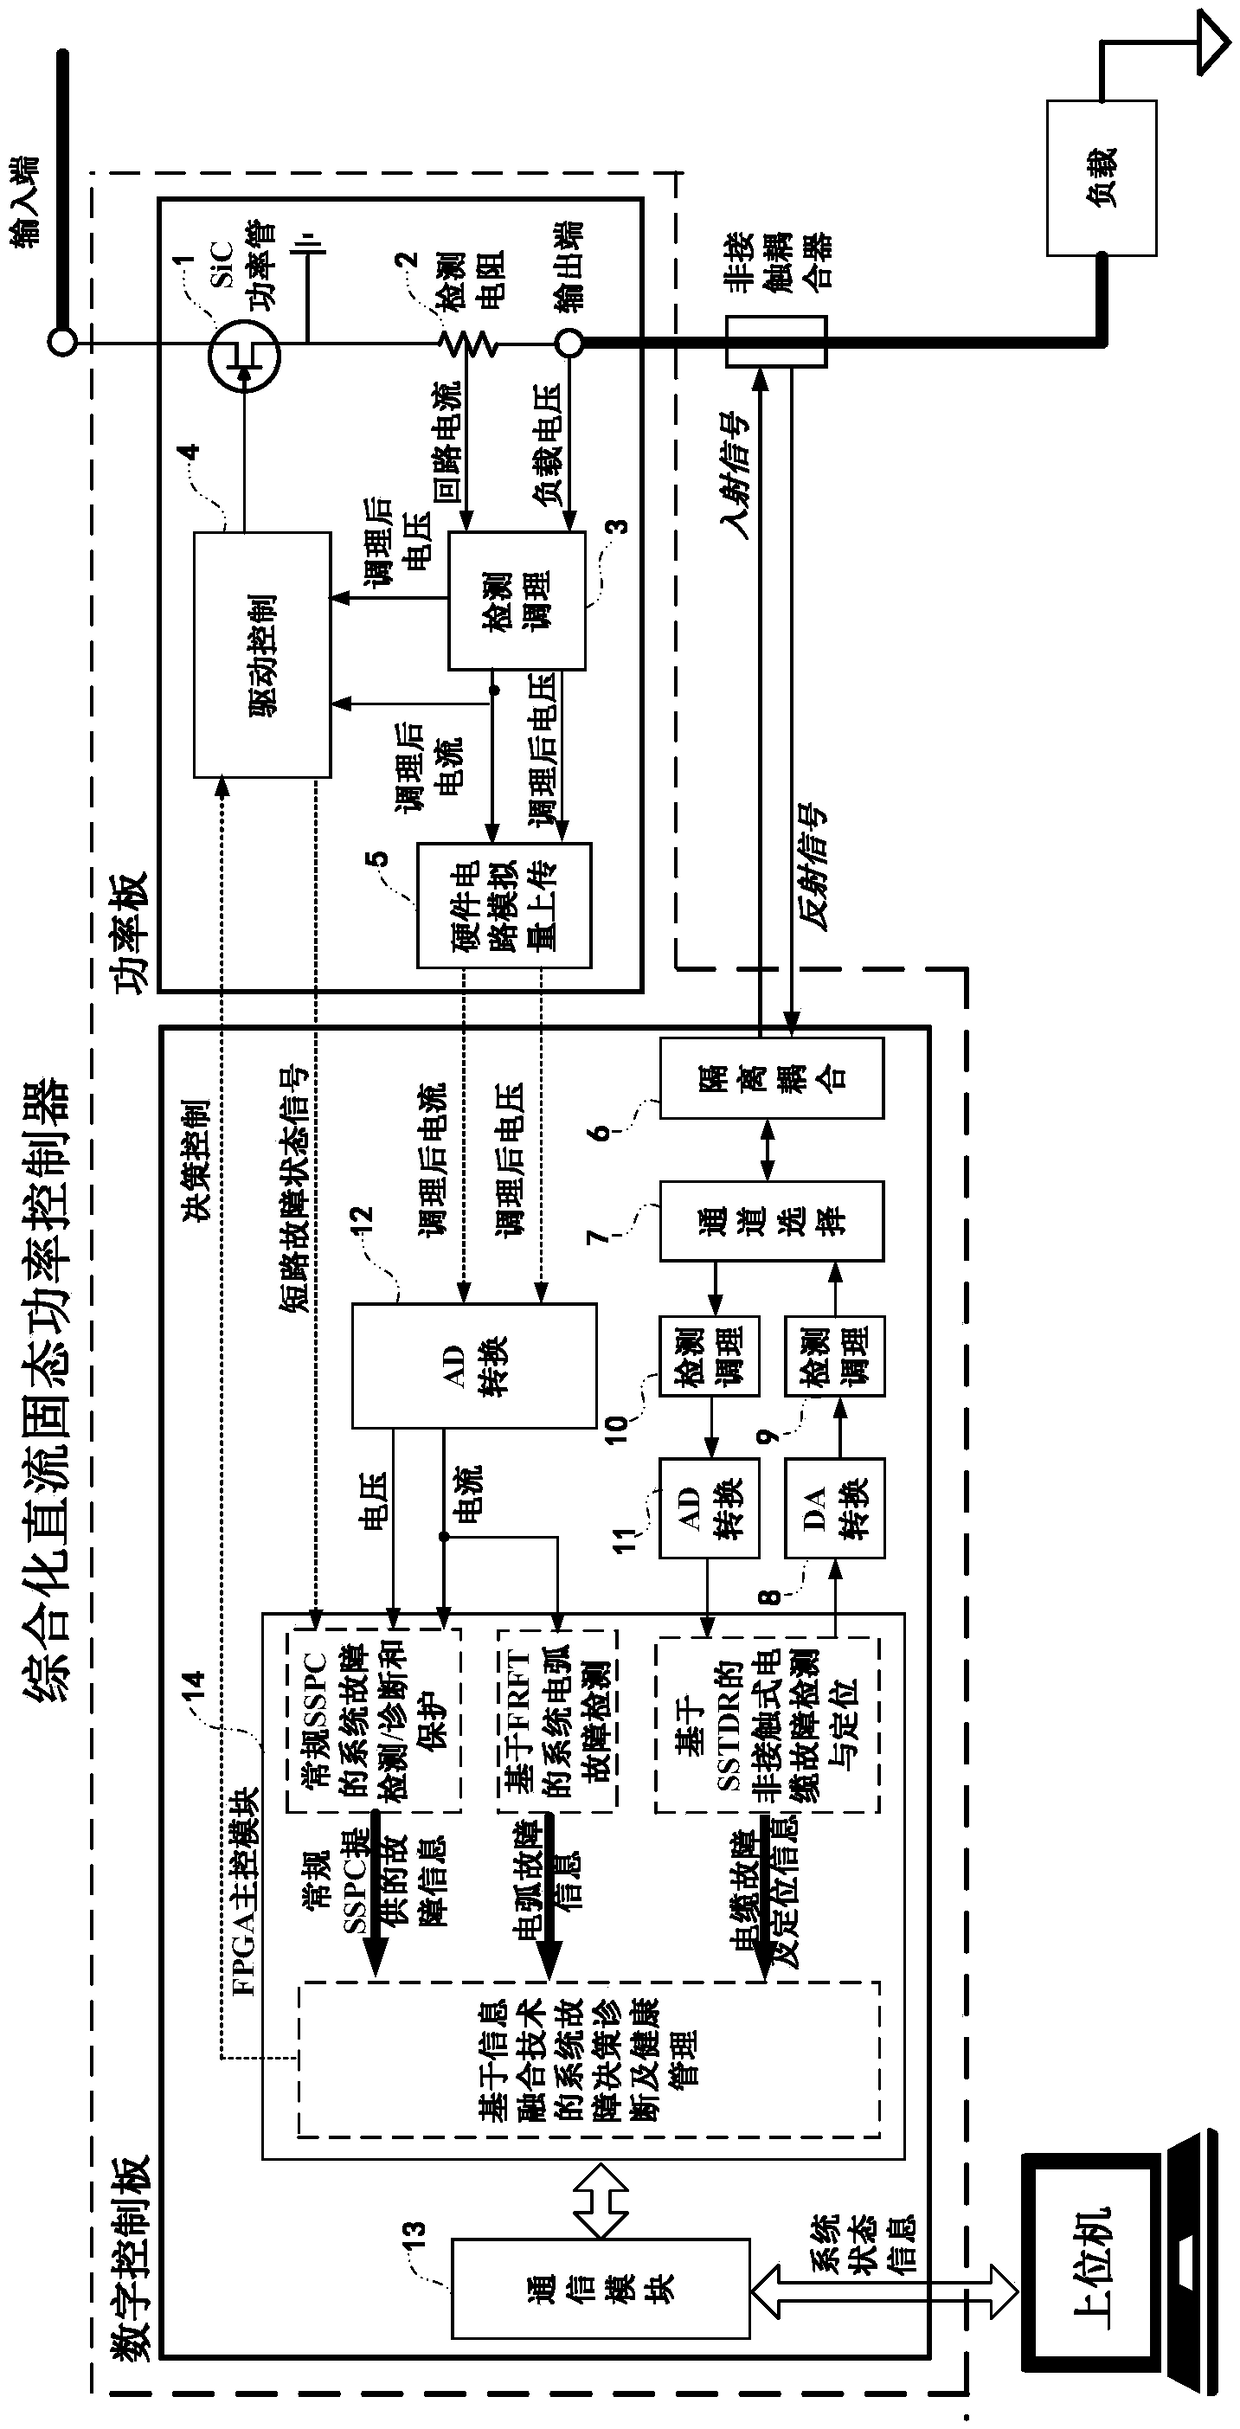 Integrated DC solid state power controller and fault decision-making diagnosis method